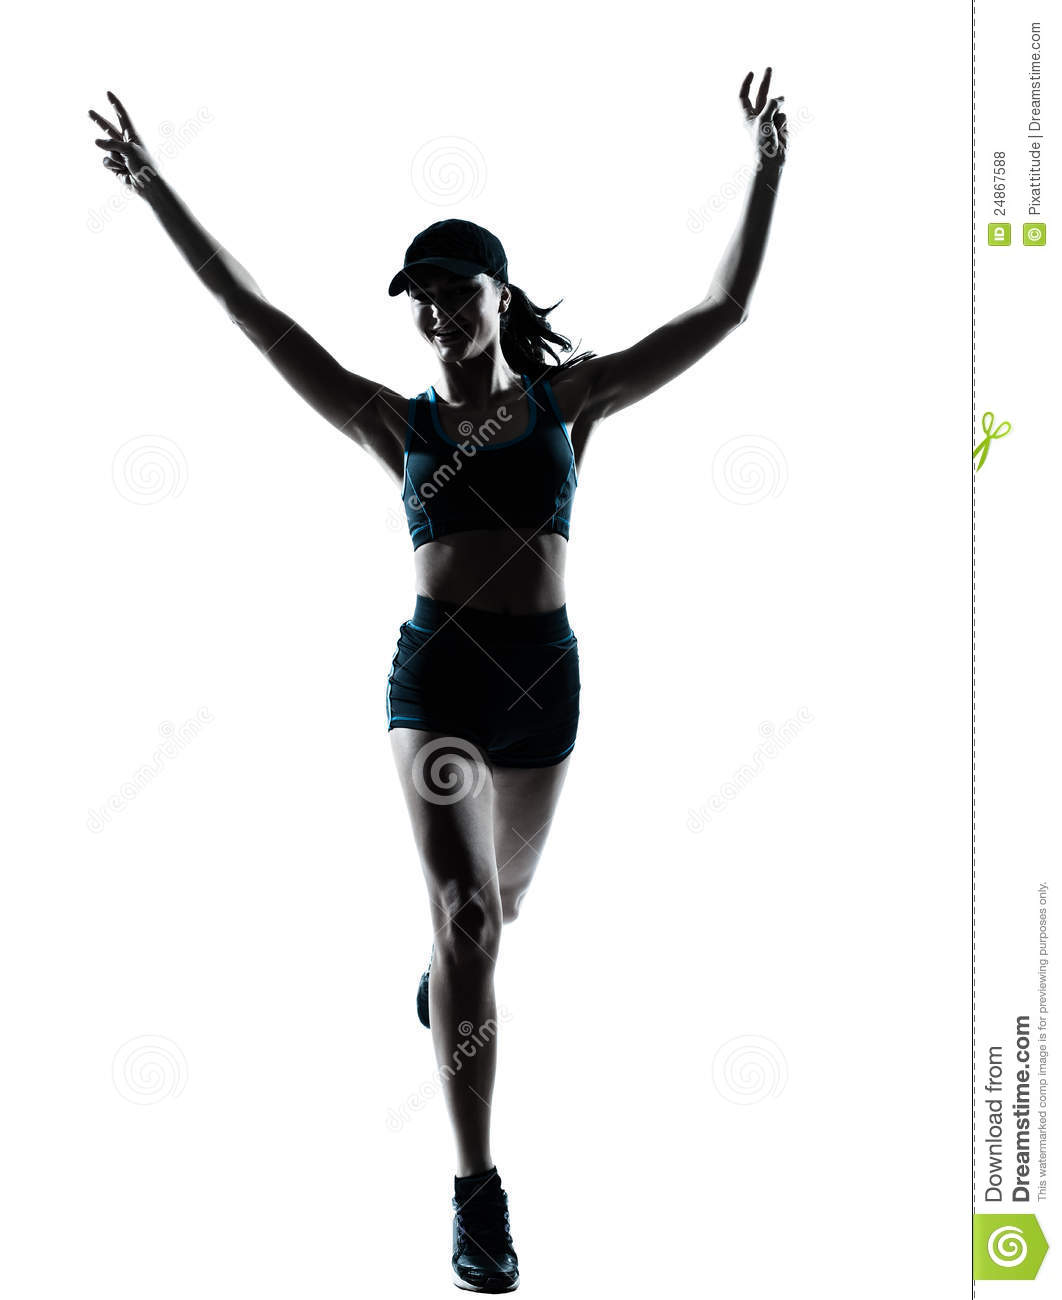 Woman Runner Jogger Victorious Royalty Free Stock Photos   Image